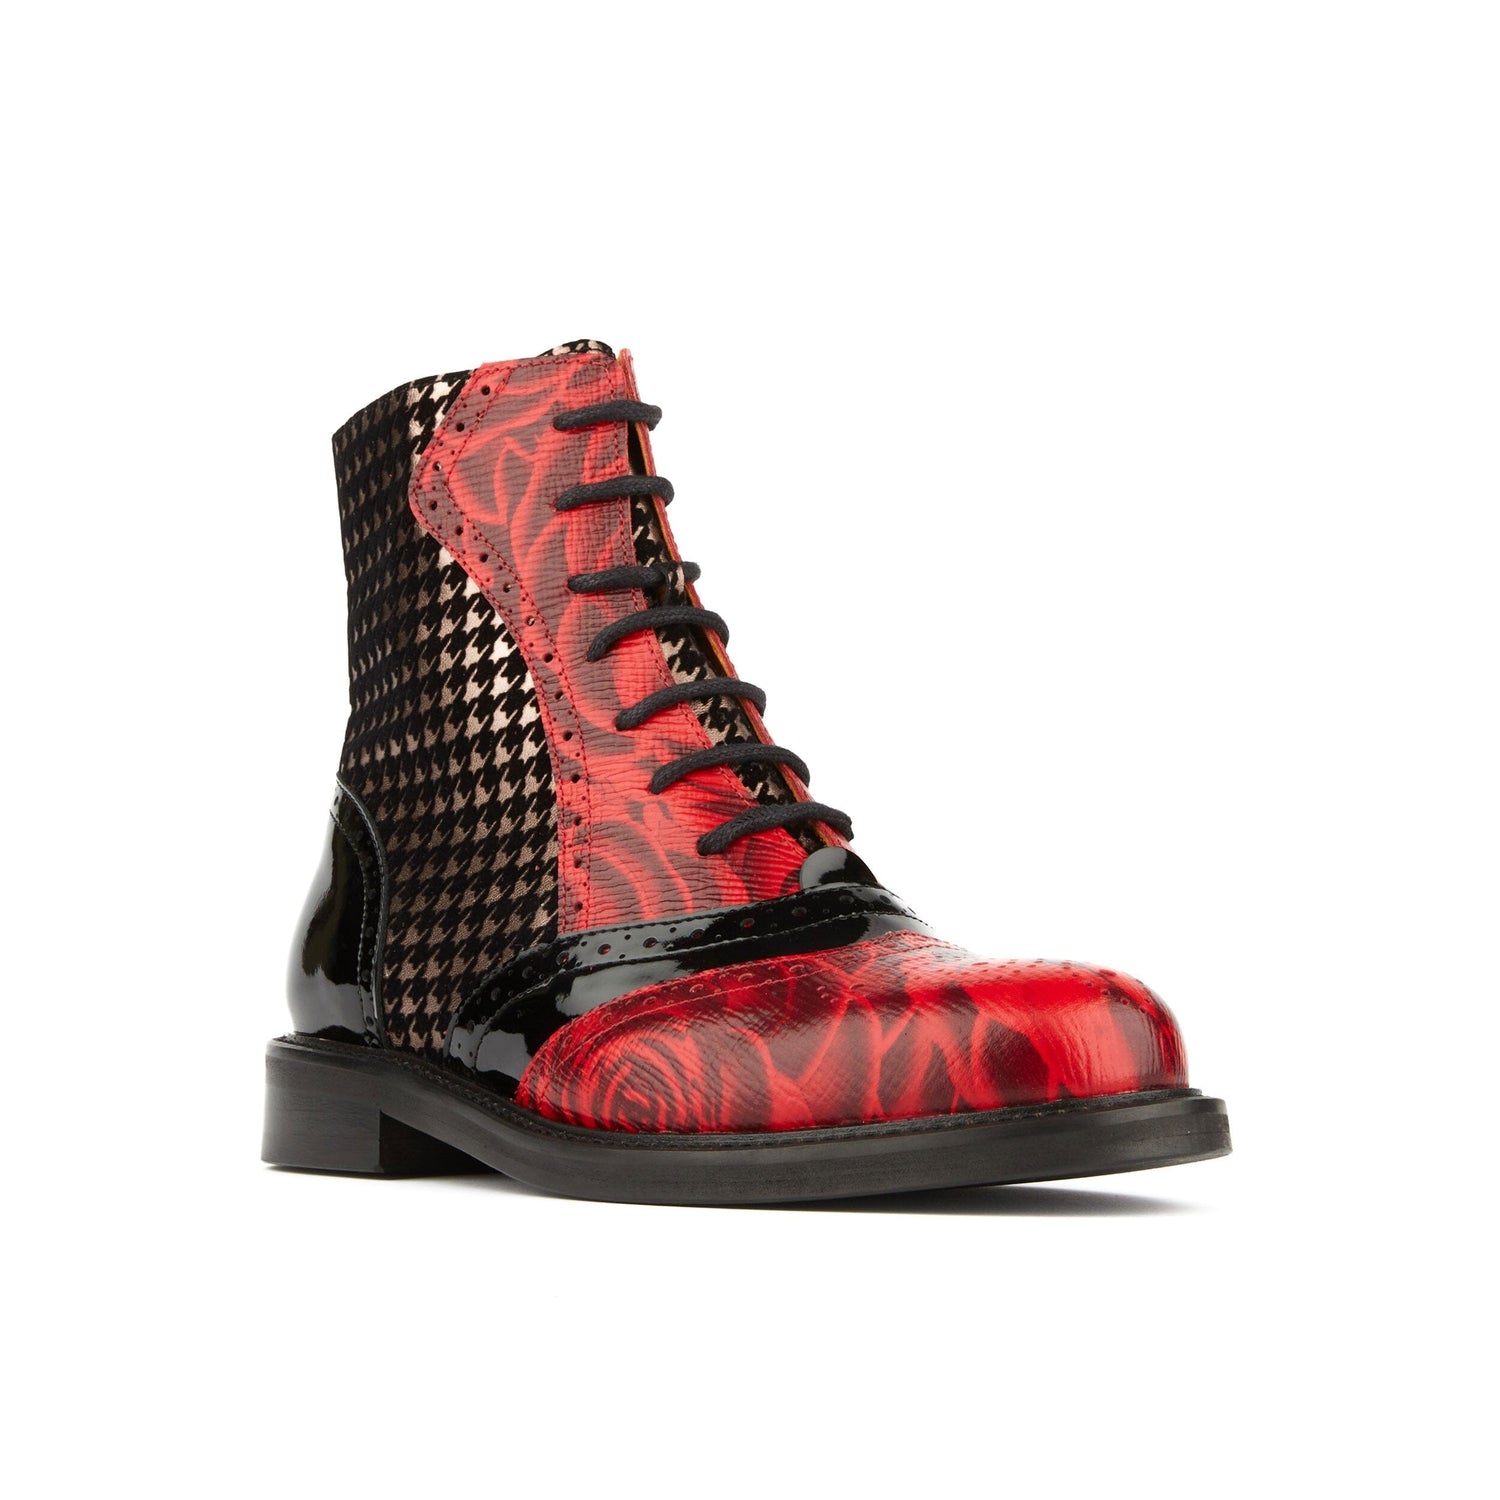 Brick Lane Boots - Red Rose & Houndstooth Womens Ankle Boots Embassy London 